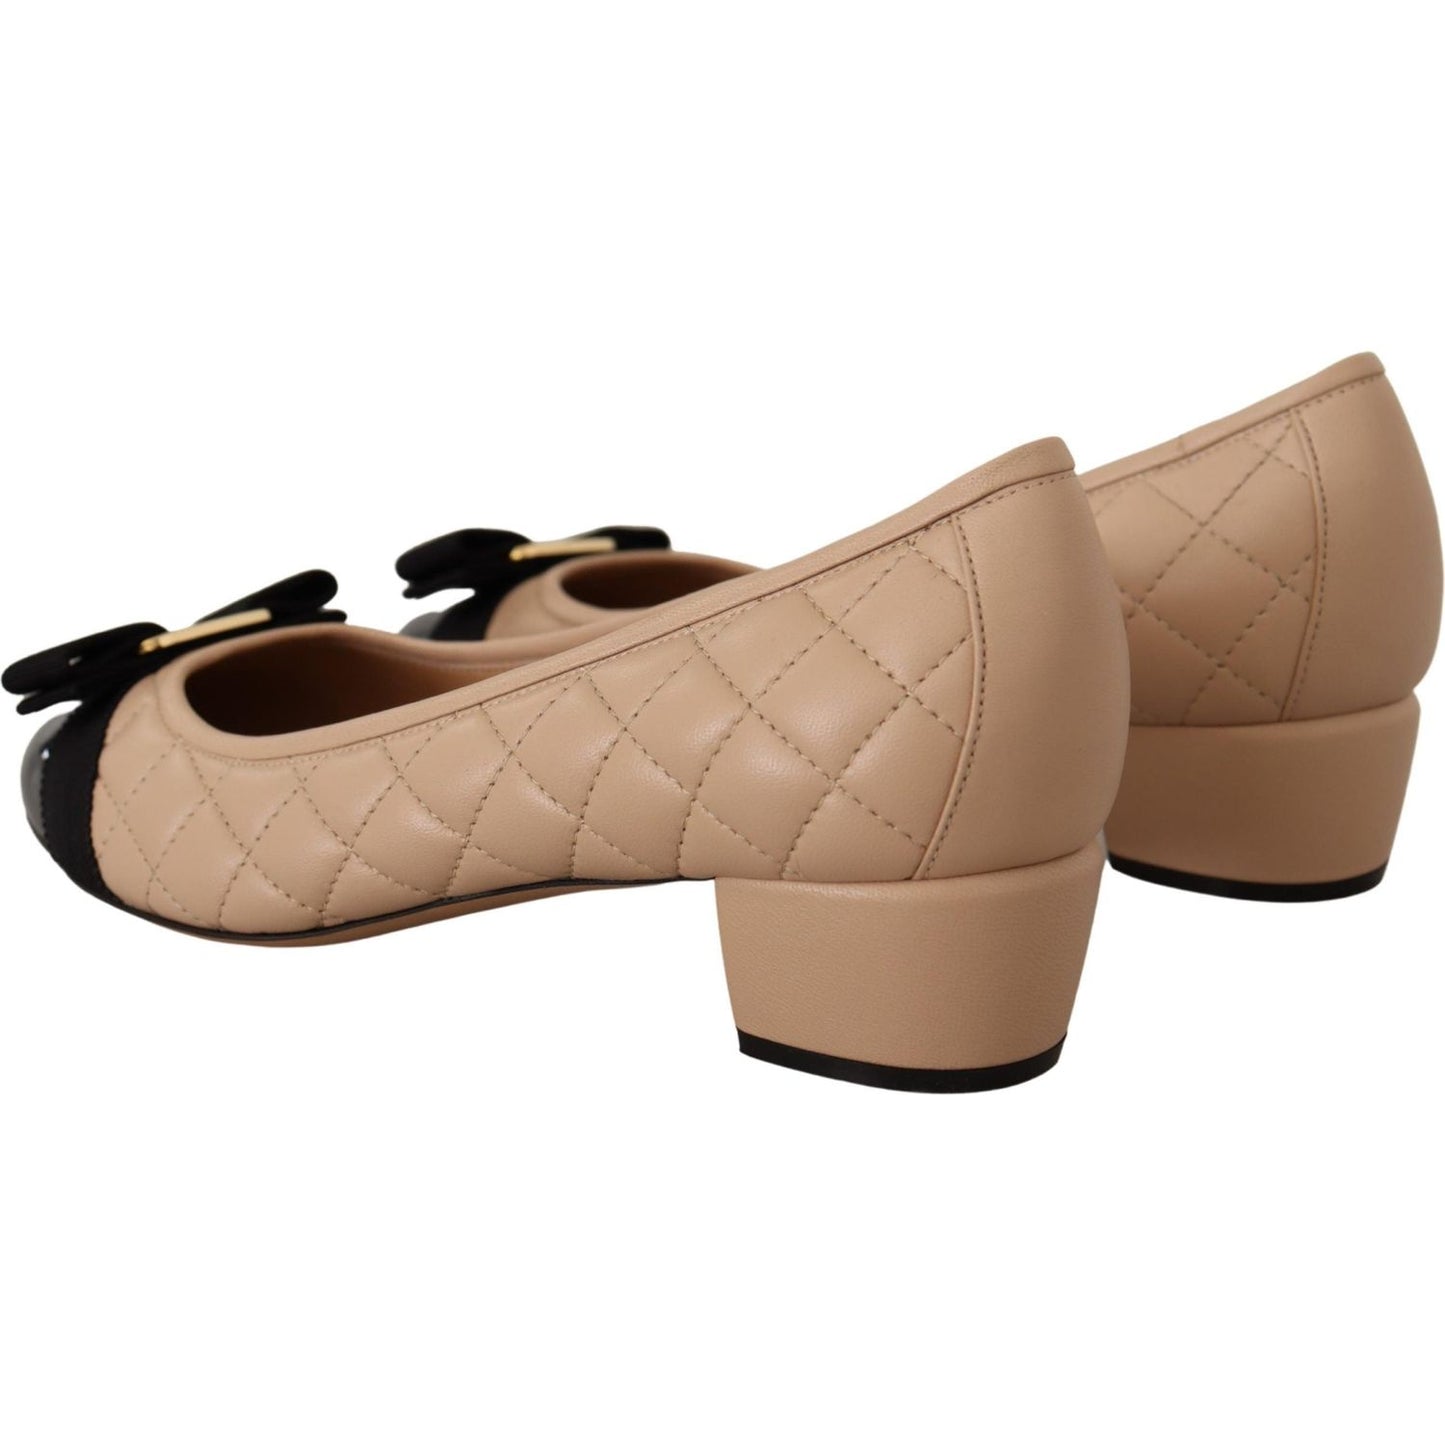 Salvatore Ferragamo Elegant Quilted Leather Pumps in Beige and Black WOMAN PUMPS beige-and-black-nappa-leather-pumps-shoes